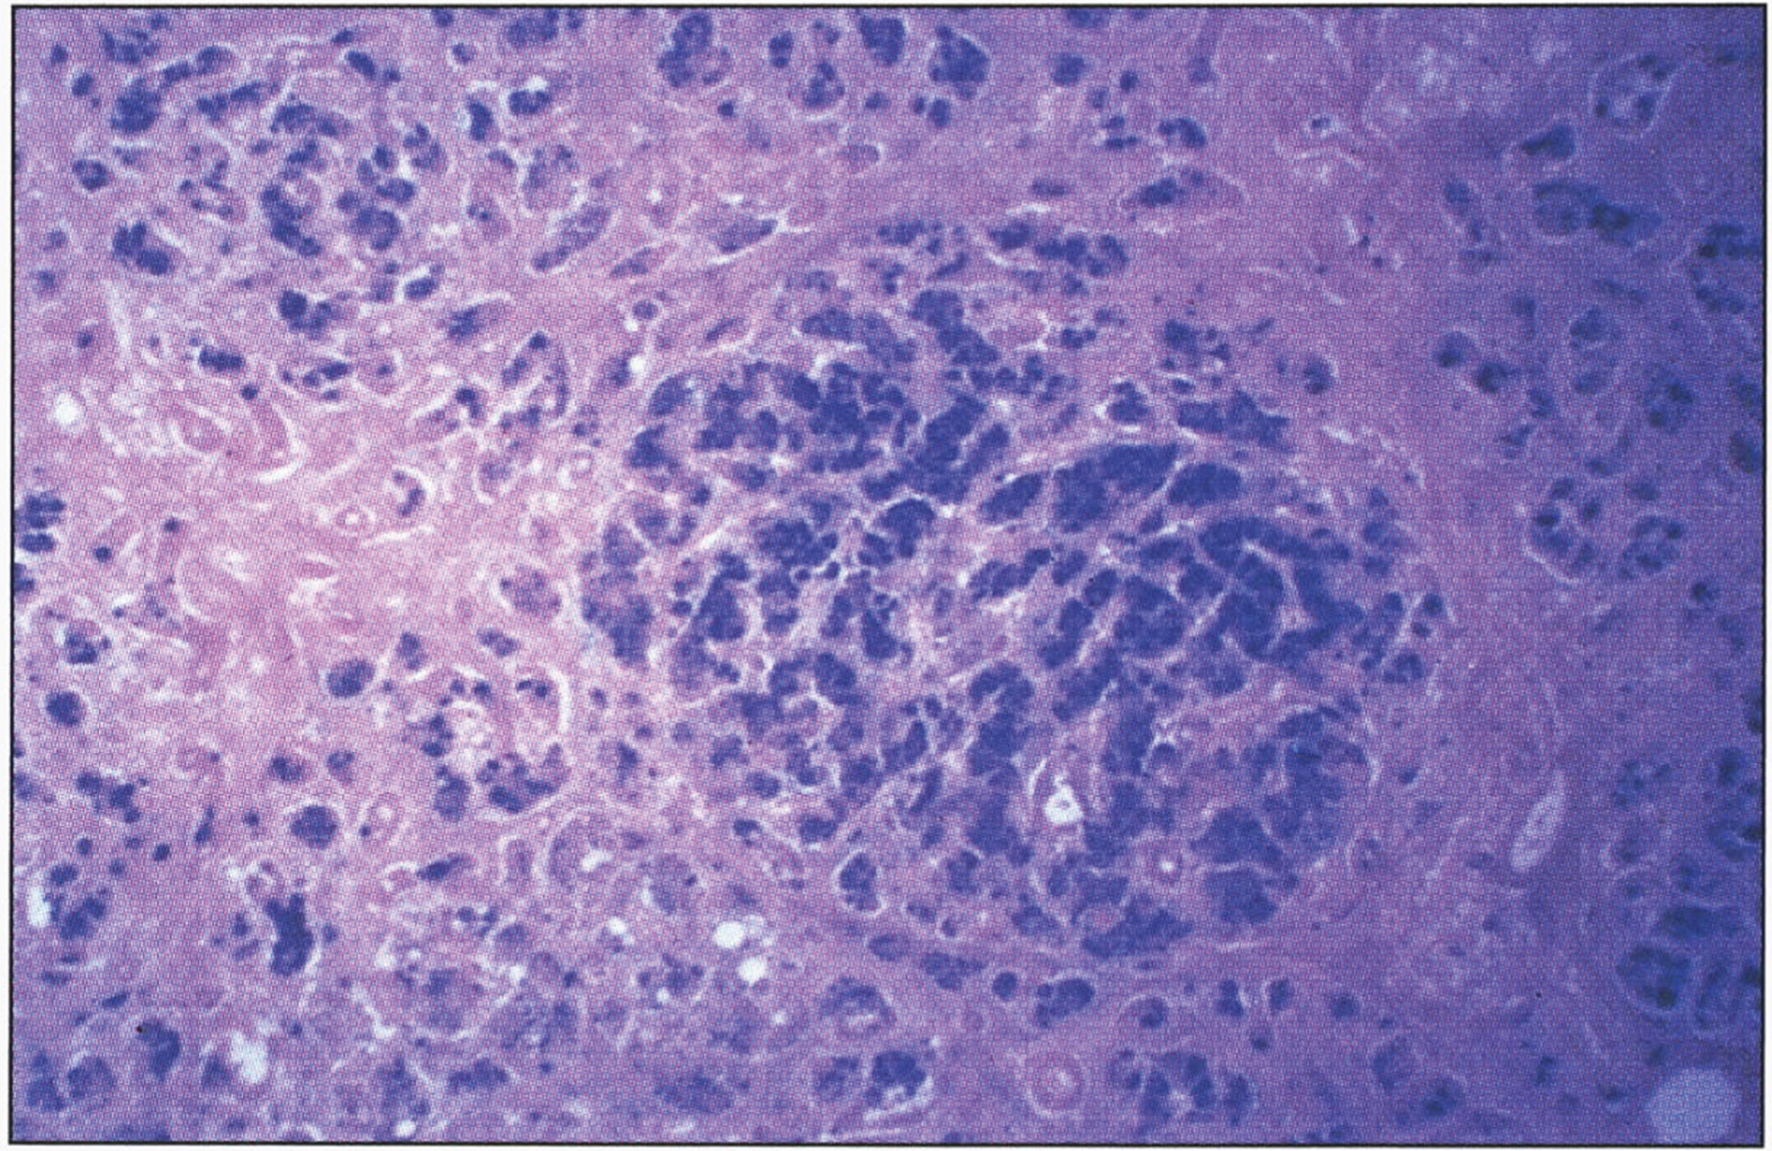 Microscopic appearance of the pancreas in hereditary hemochromatosis showing iron pigment in pancreatic acinar and islet cells. Prussian blue stain.